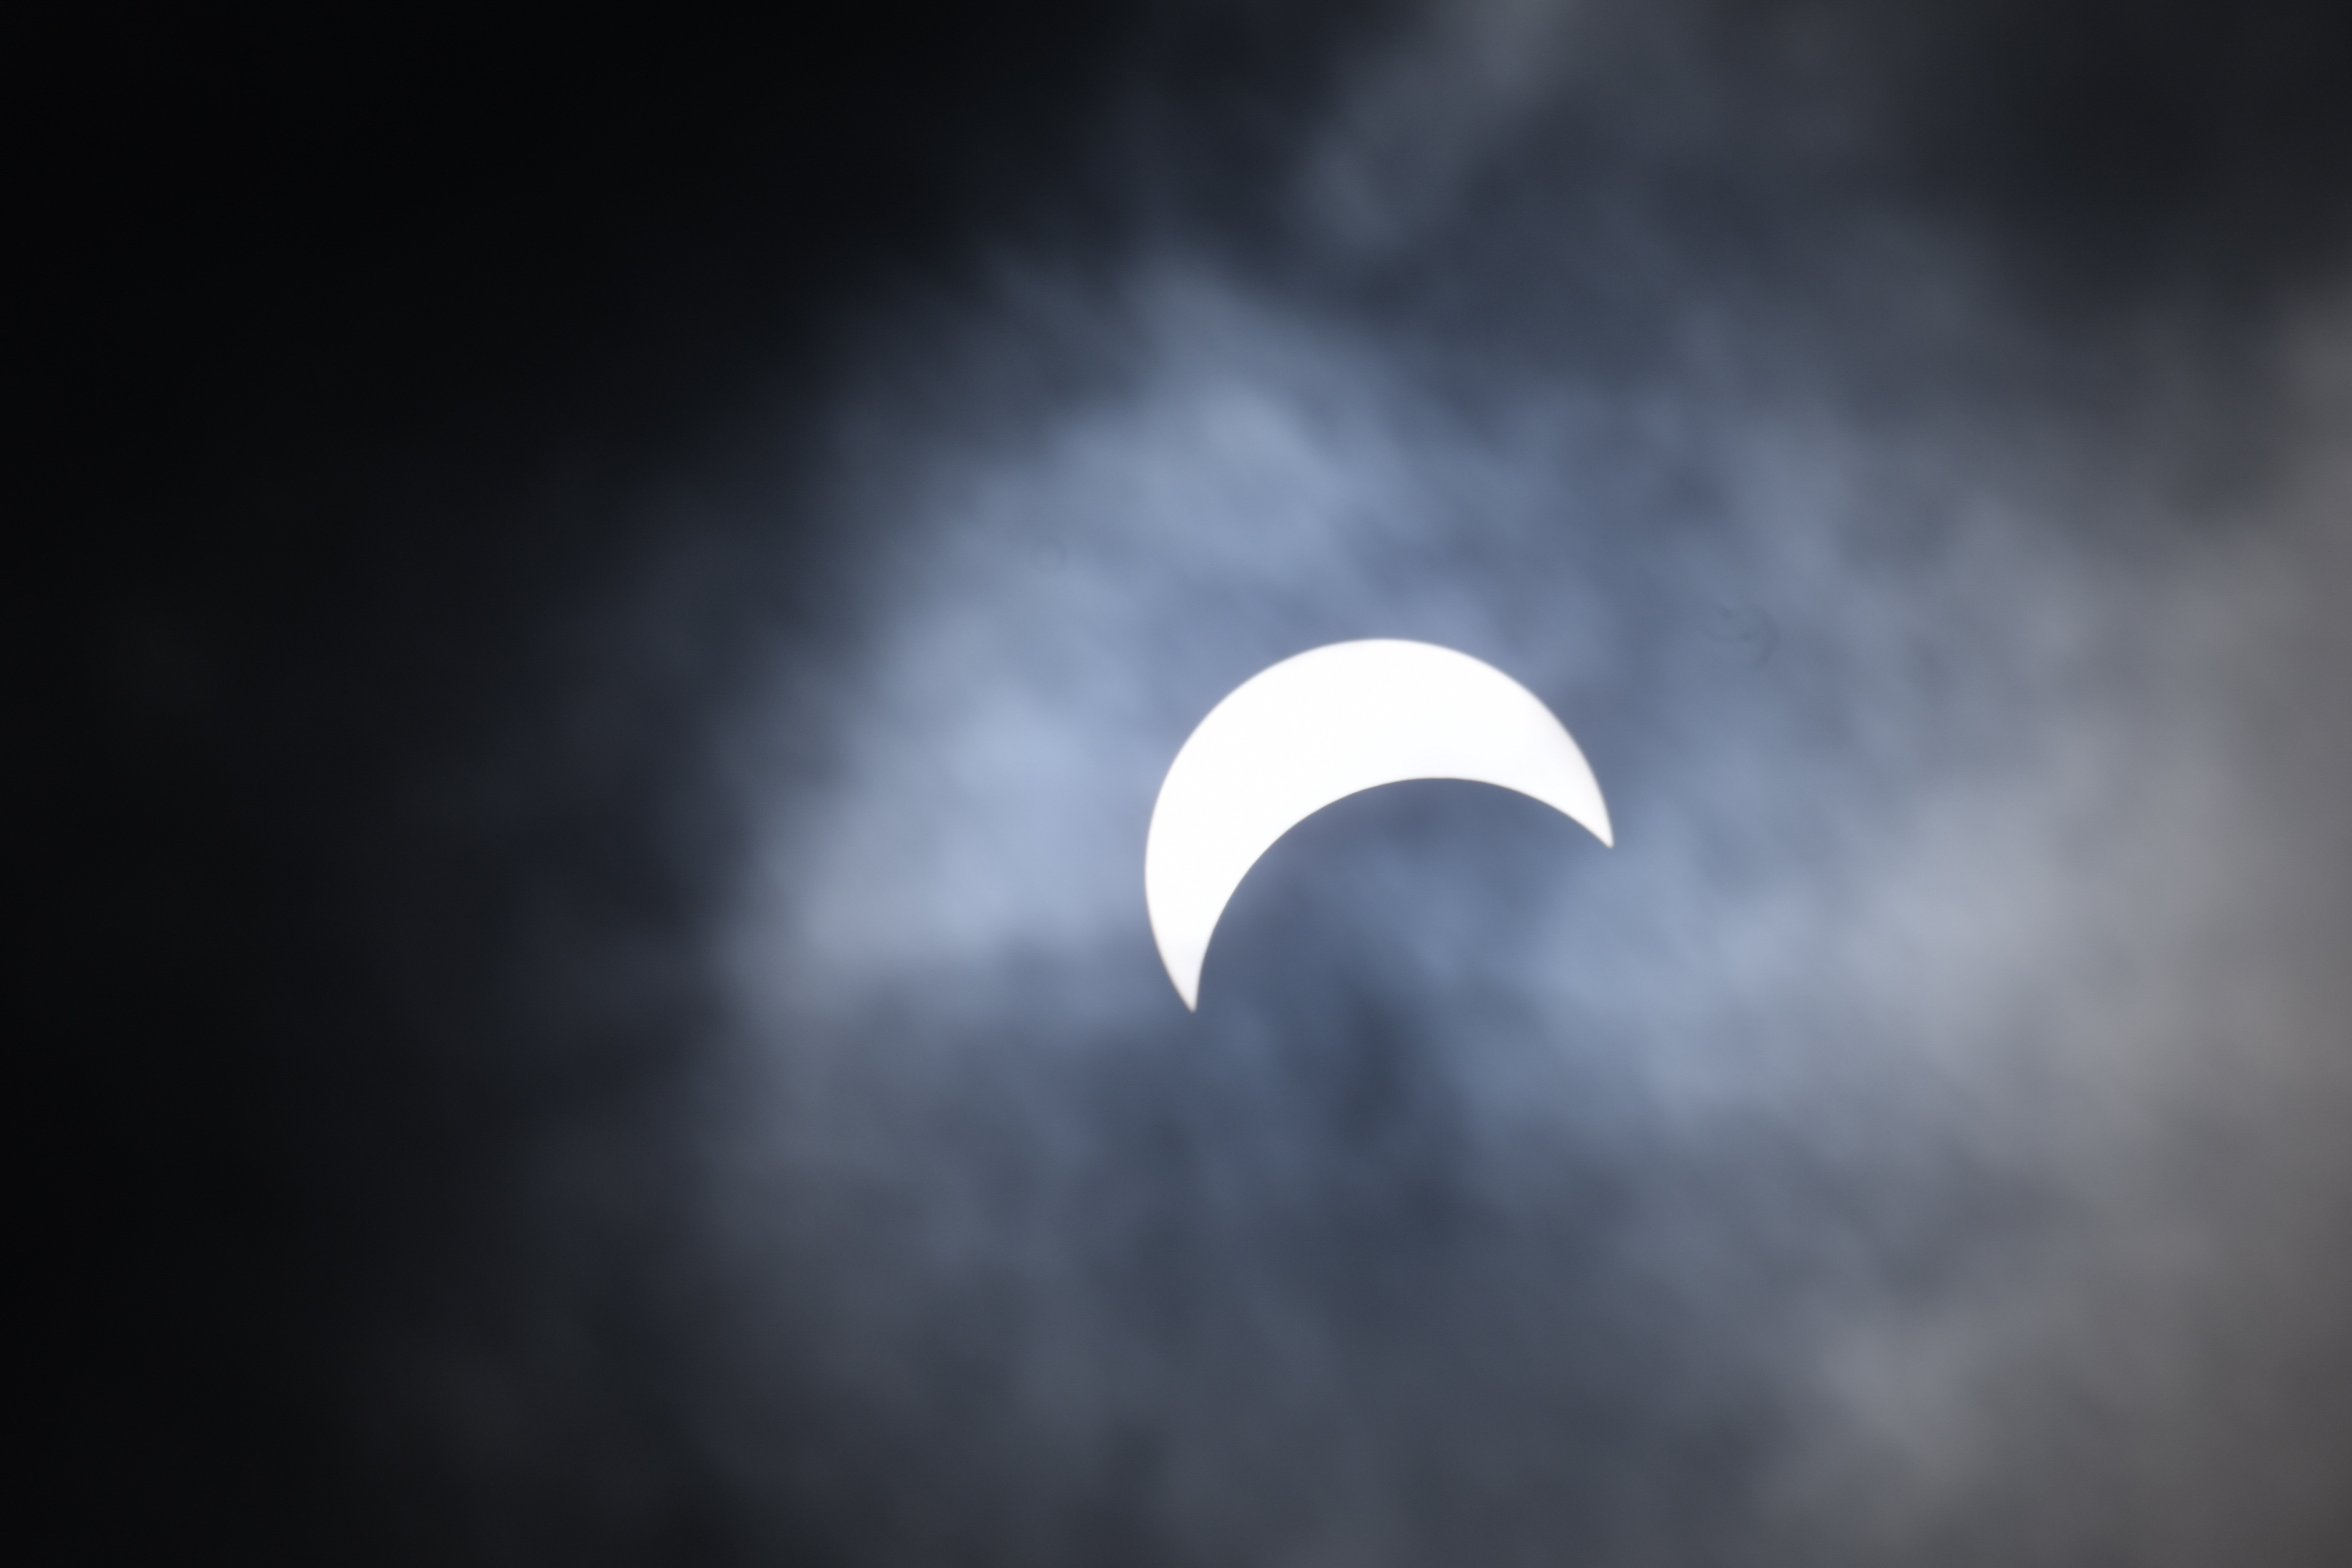 2:50 pm - switched to the 500mm lens with solar filter